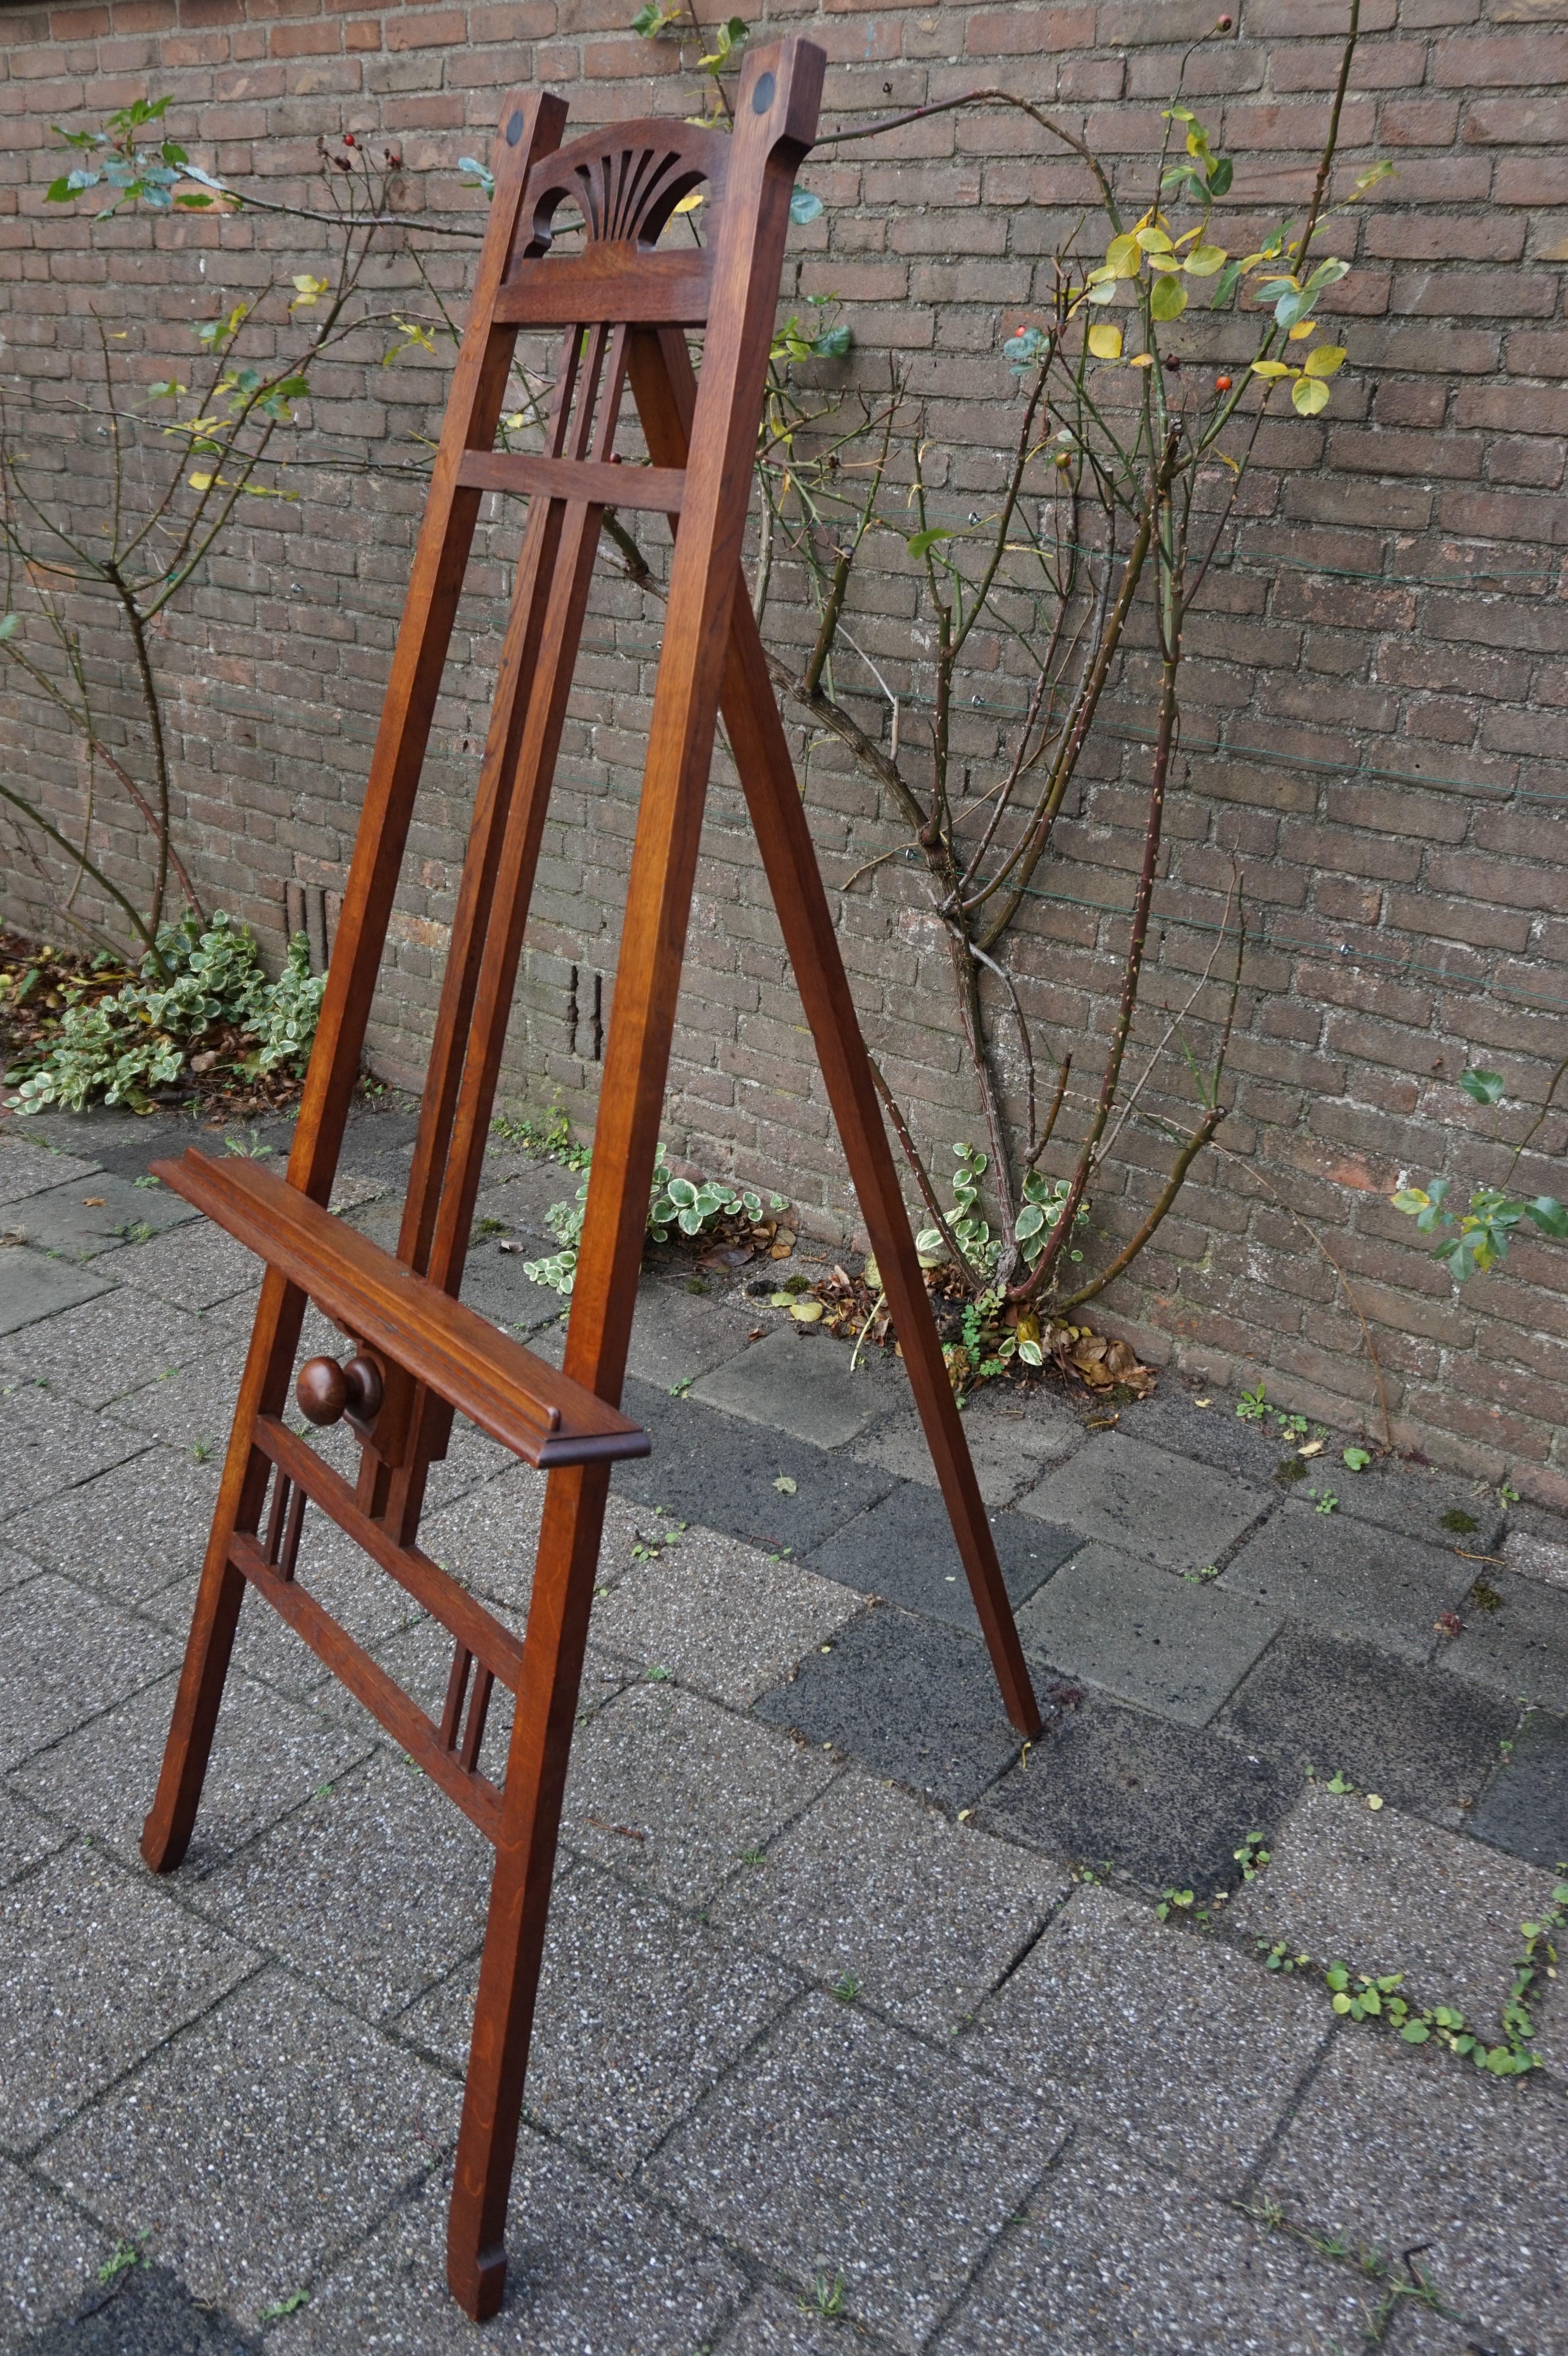 Beautiful design and excellent condition, antique painting stand.

This highly stylish, early 20th century studio easel has it all. 
1. The Arts and Crafts design with its subtle and stylish details is both rare and very pleasing to the eye.
2. This